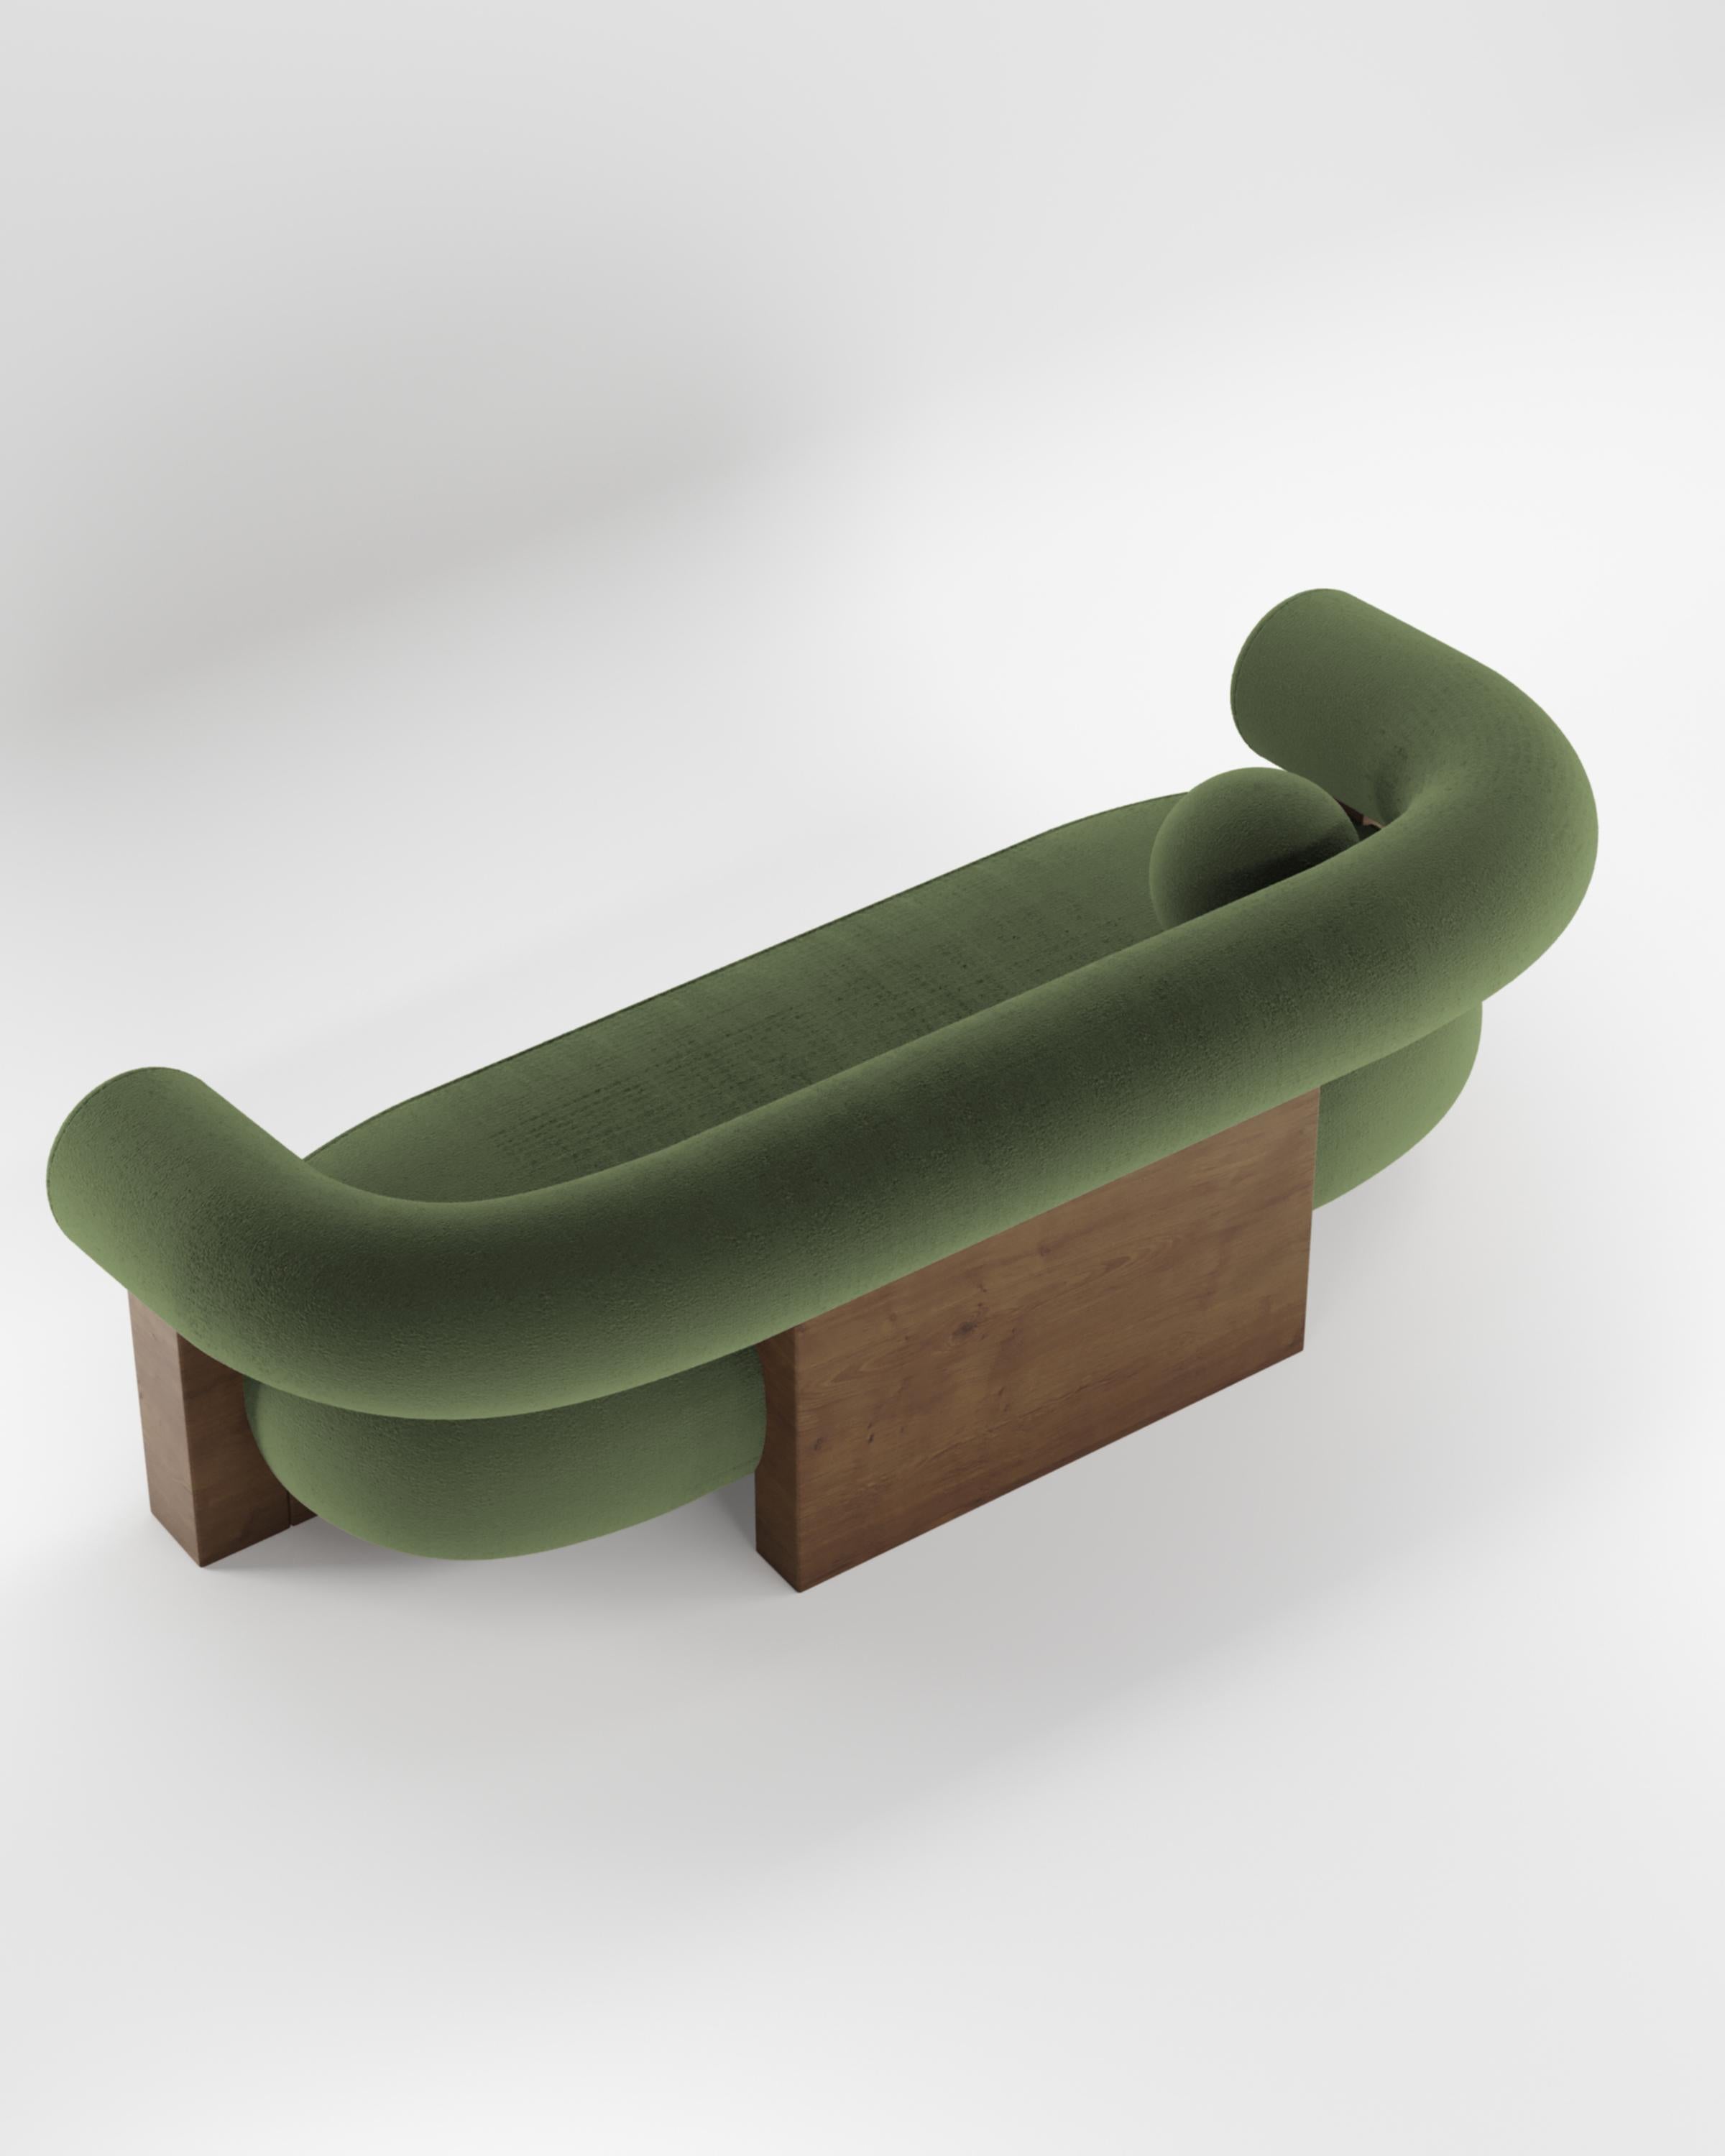 Fabric Contemporary Modern Cassete Sofa in Green & Wood by Collector Studio For Sale